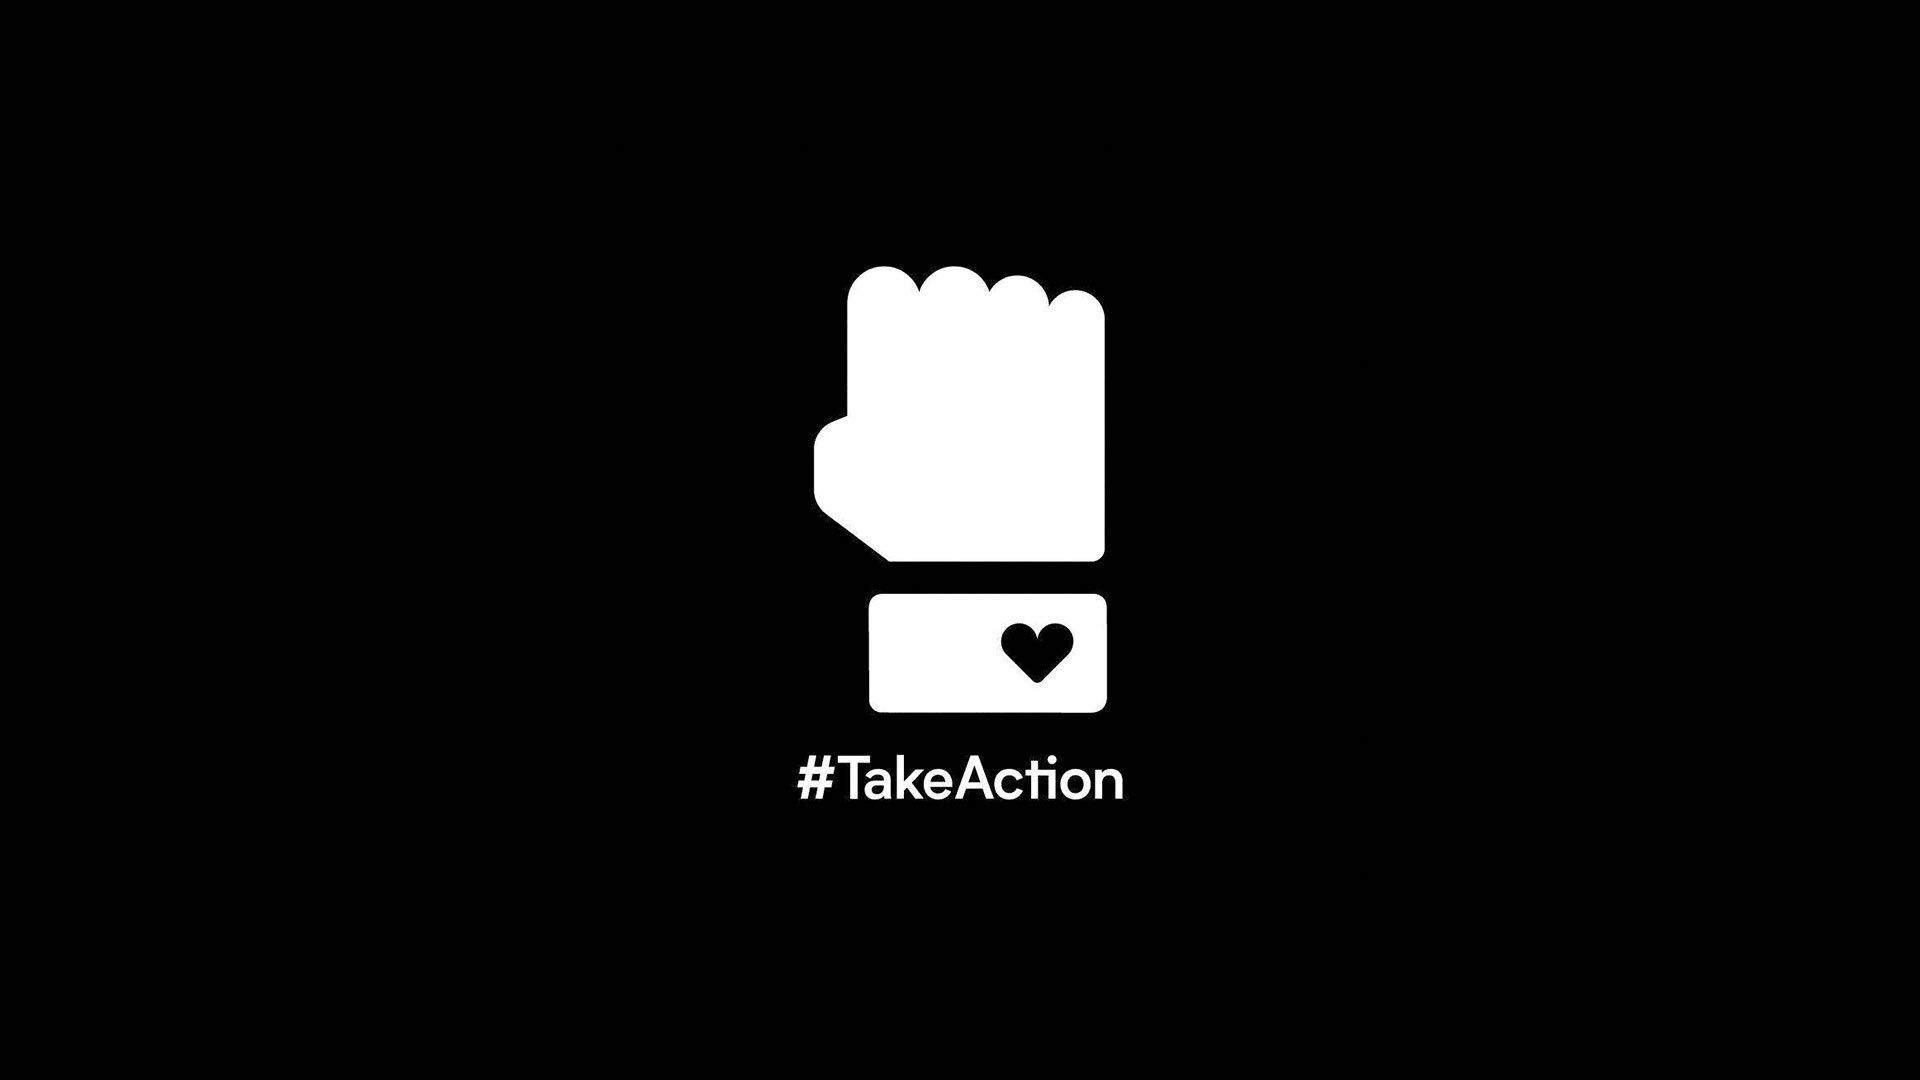 Screenshot of a white on black image of an upraised hand over a message box with a heart in it and the hashtag "#TakeAction"